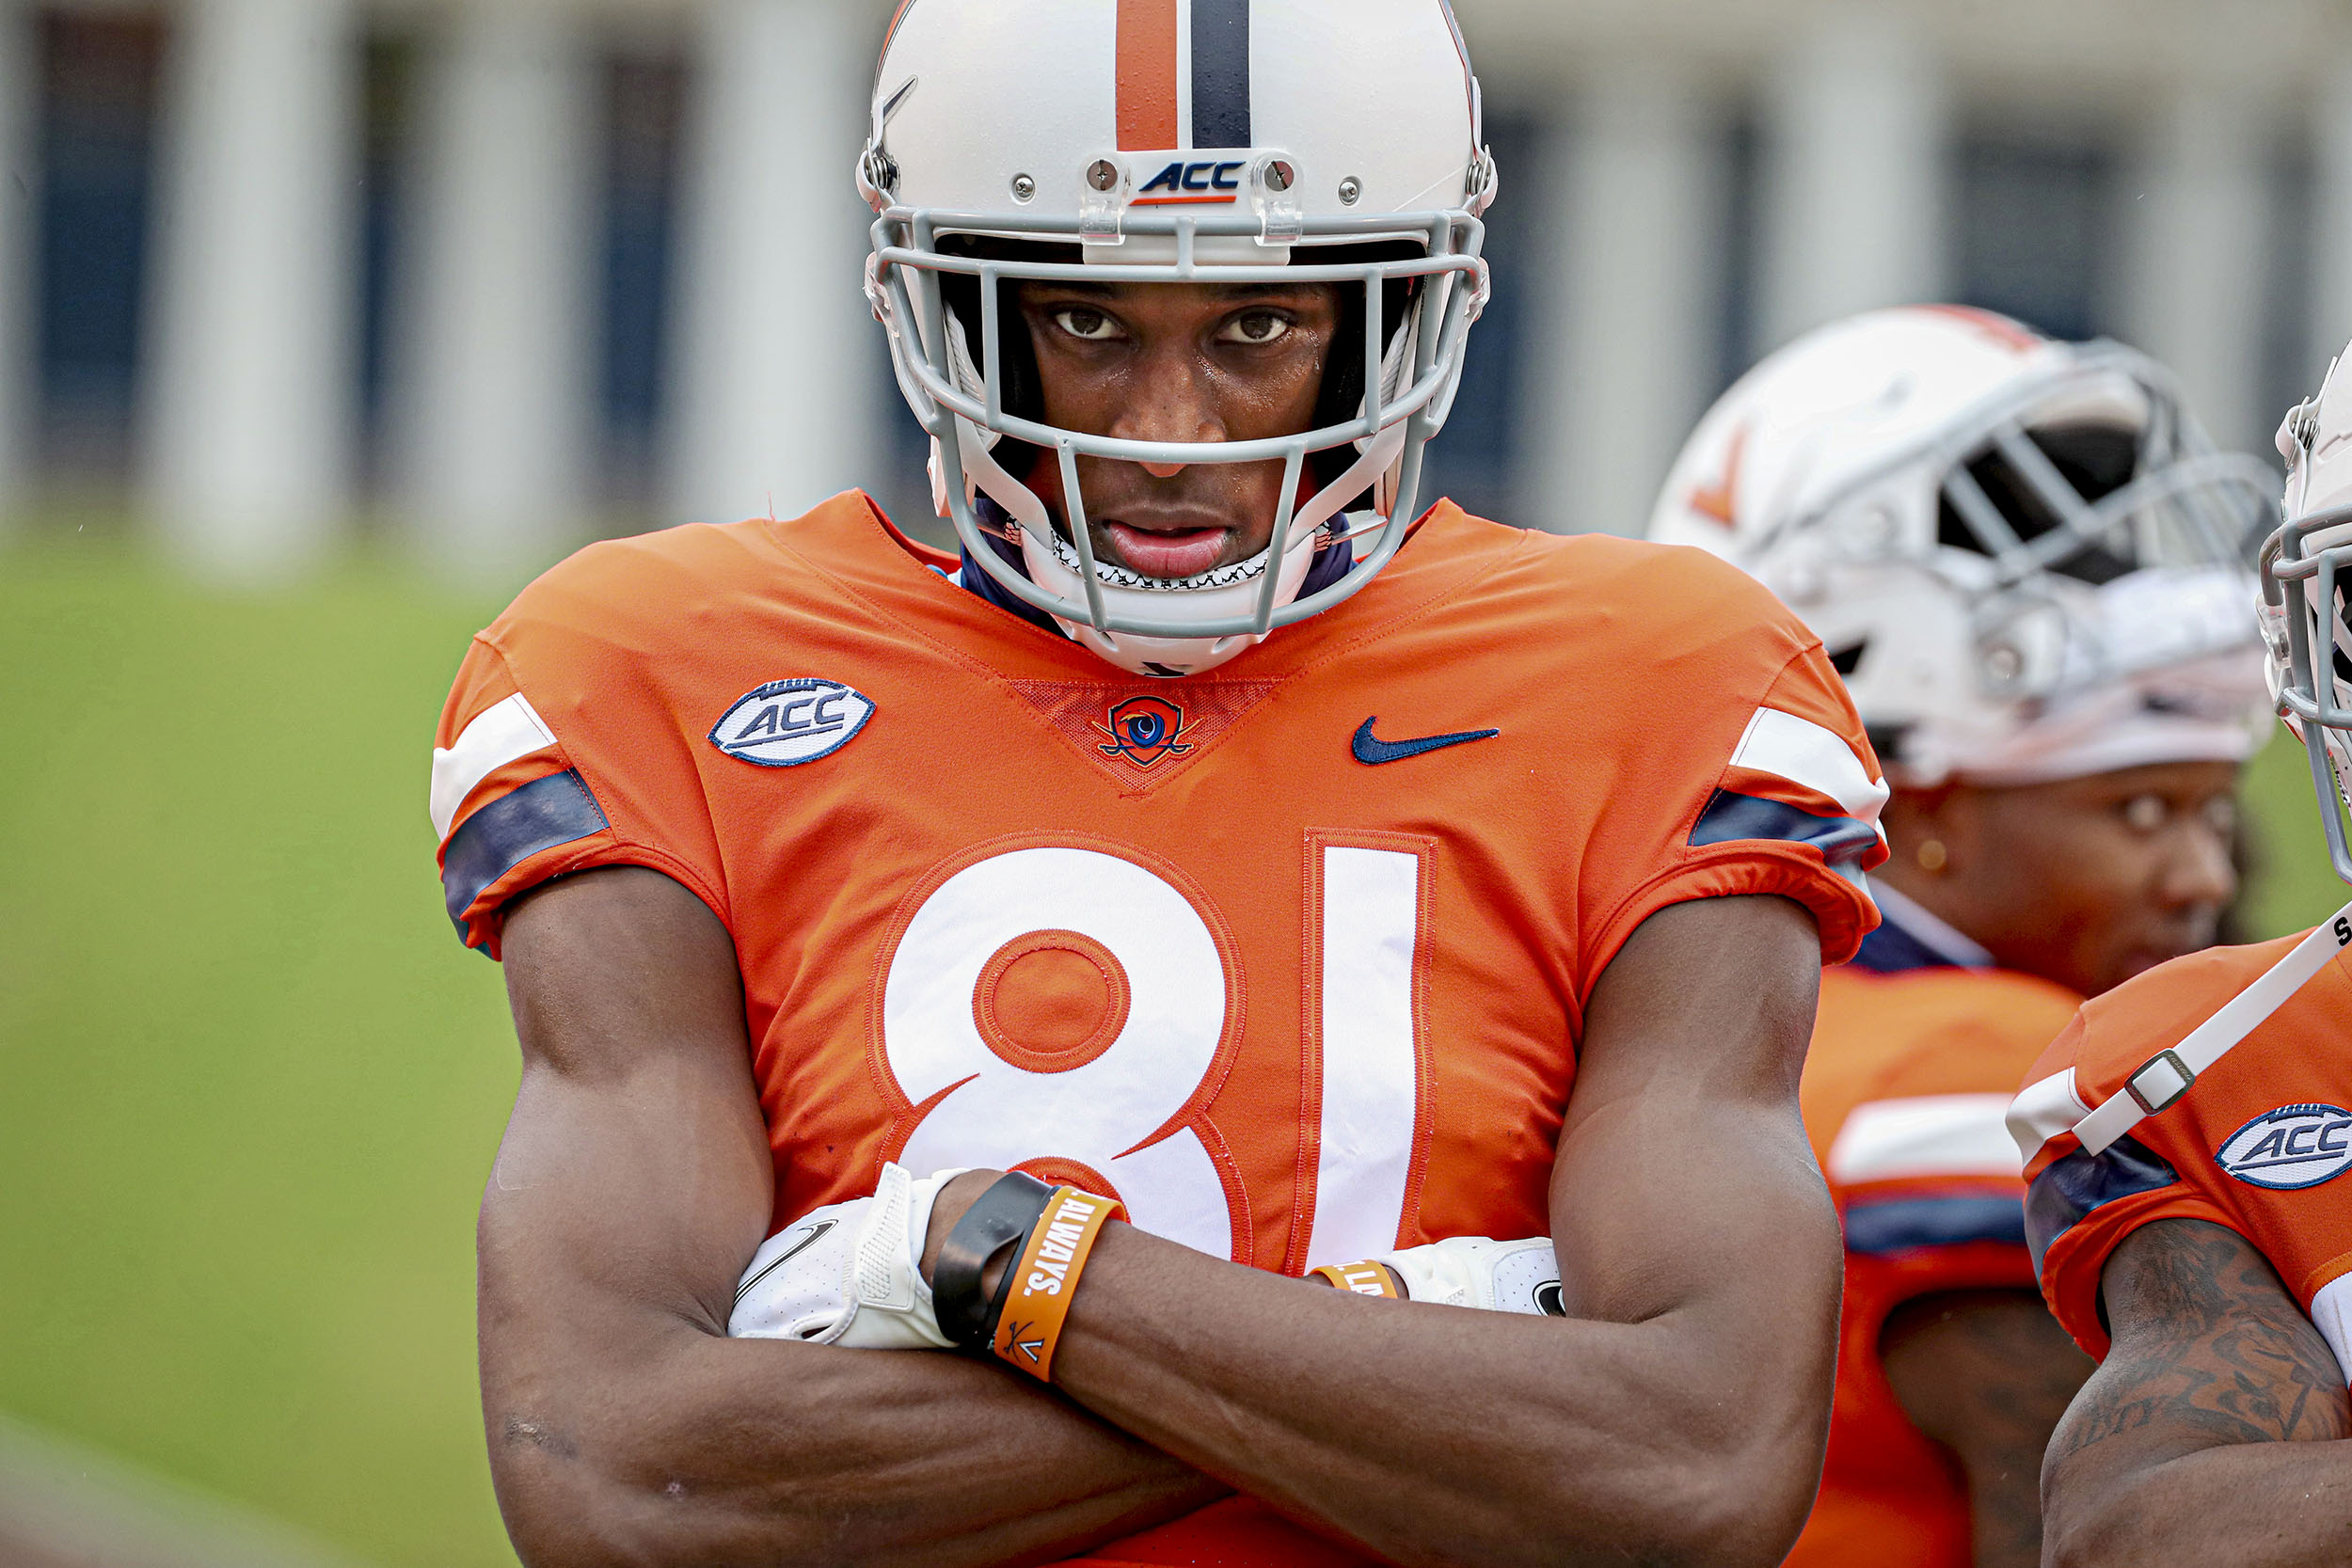 UVA mens football player dressed in orange uniform with arms crossed staring directly at the camera